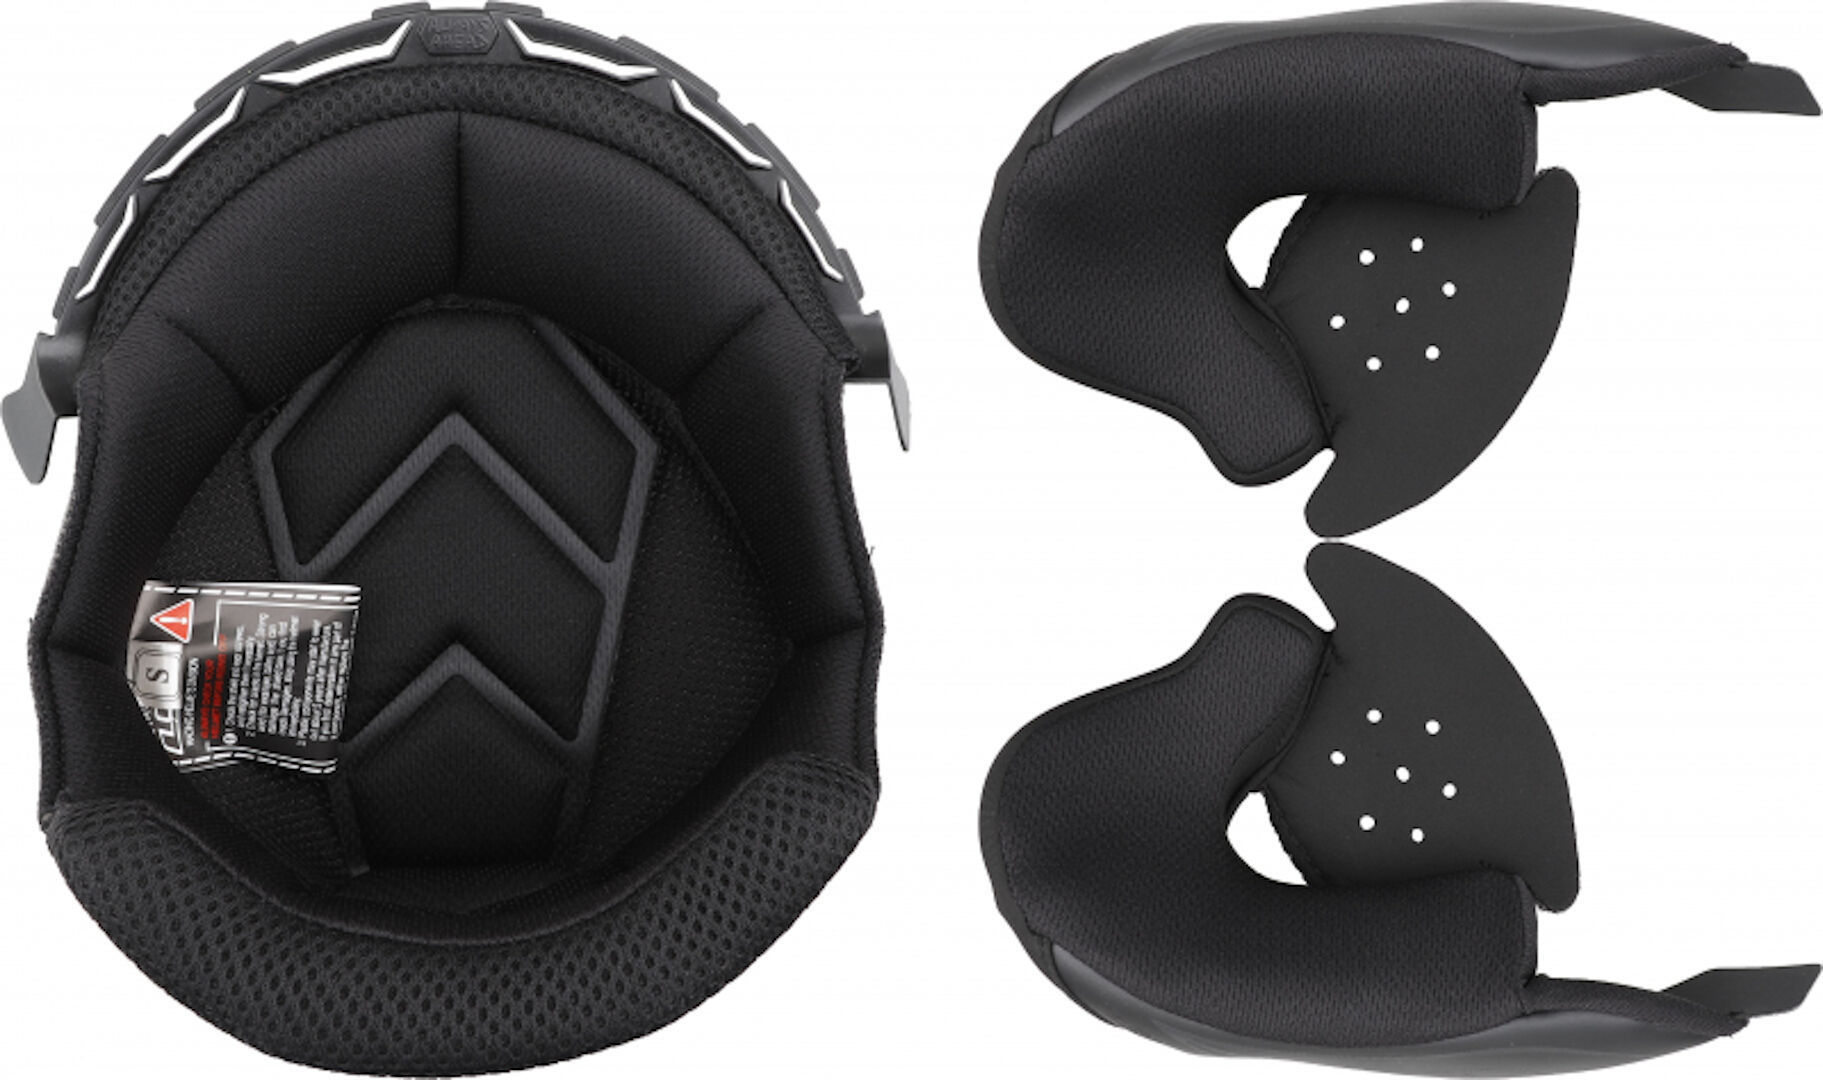 Photos - Other for Motorcycles LS2 Of600 Copter Inner Lining & Cheek Pads Unisex Black Size: S 800600lnr0 